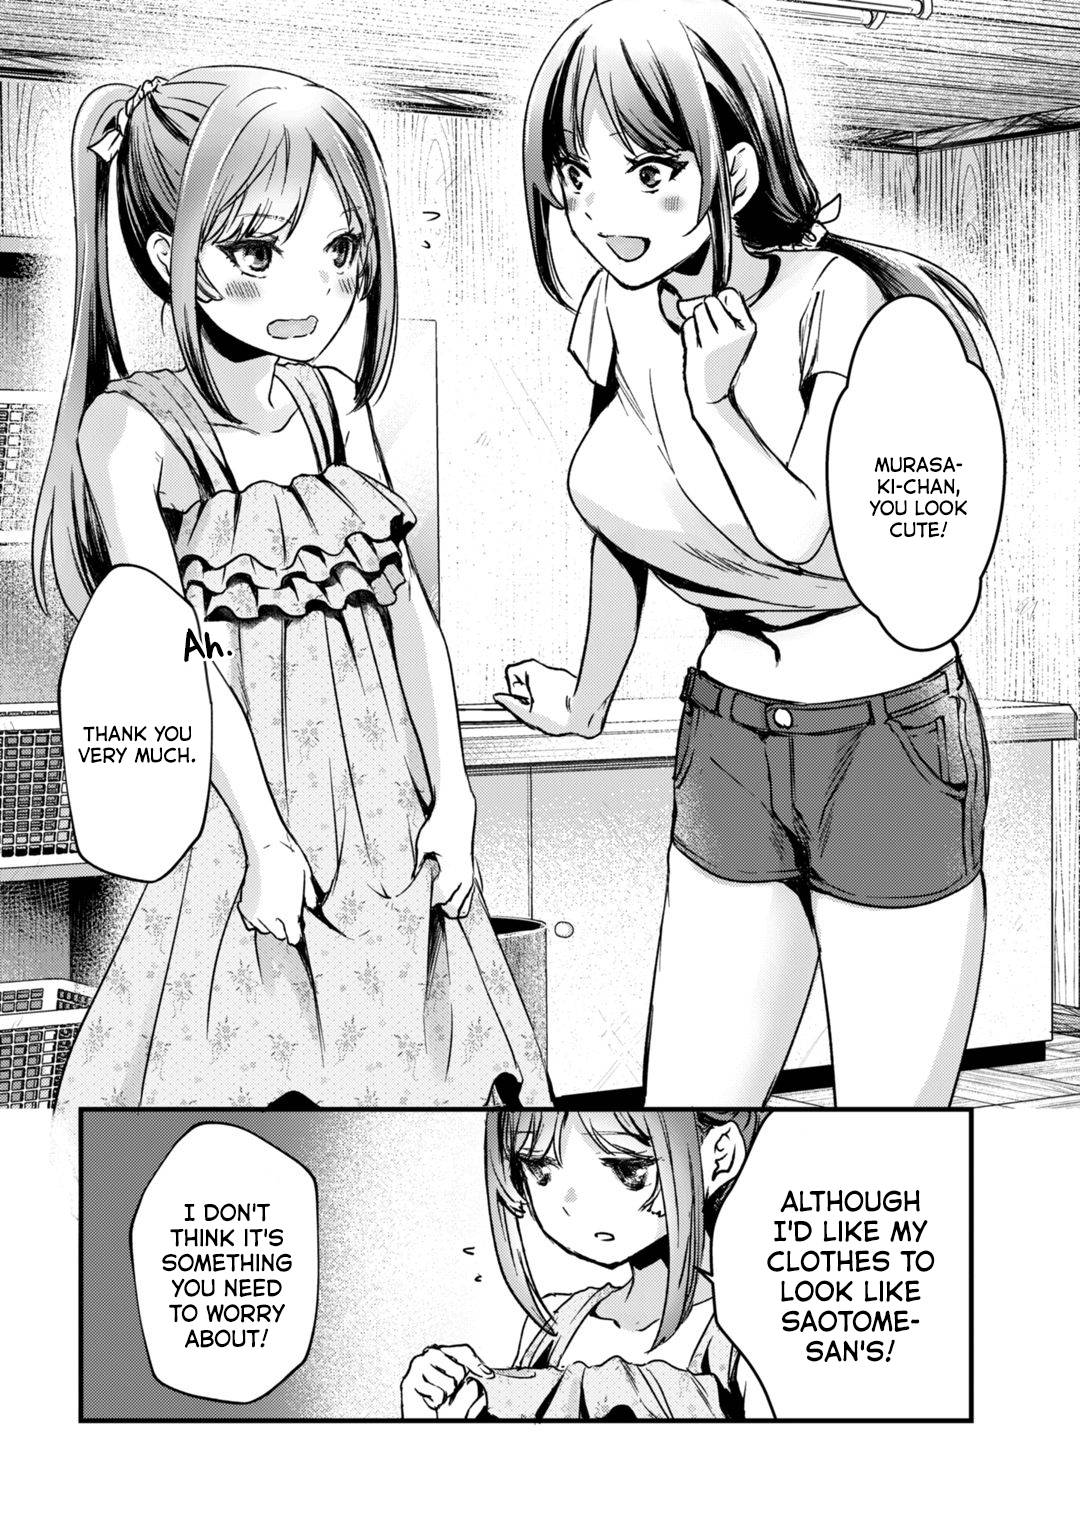 It's Fun Having a 300,000 Yen a Month Job Welcoming Home an Onee-san Who Doesn't Find Meaning in a Job That Pays Her 500,000 Yen a Month chapter 14 page 11